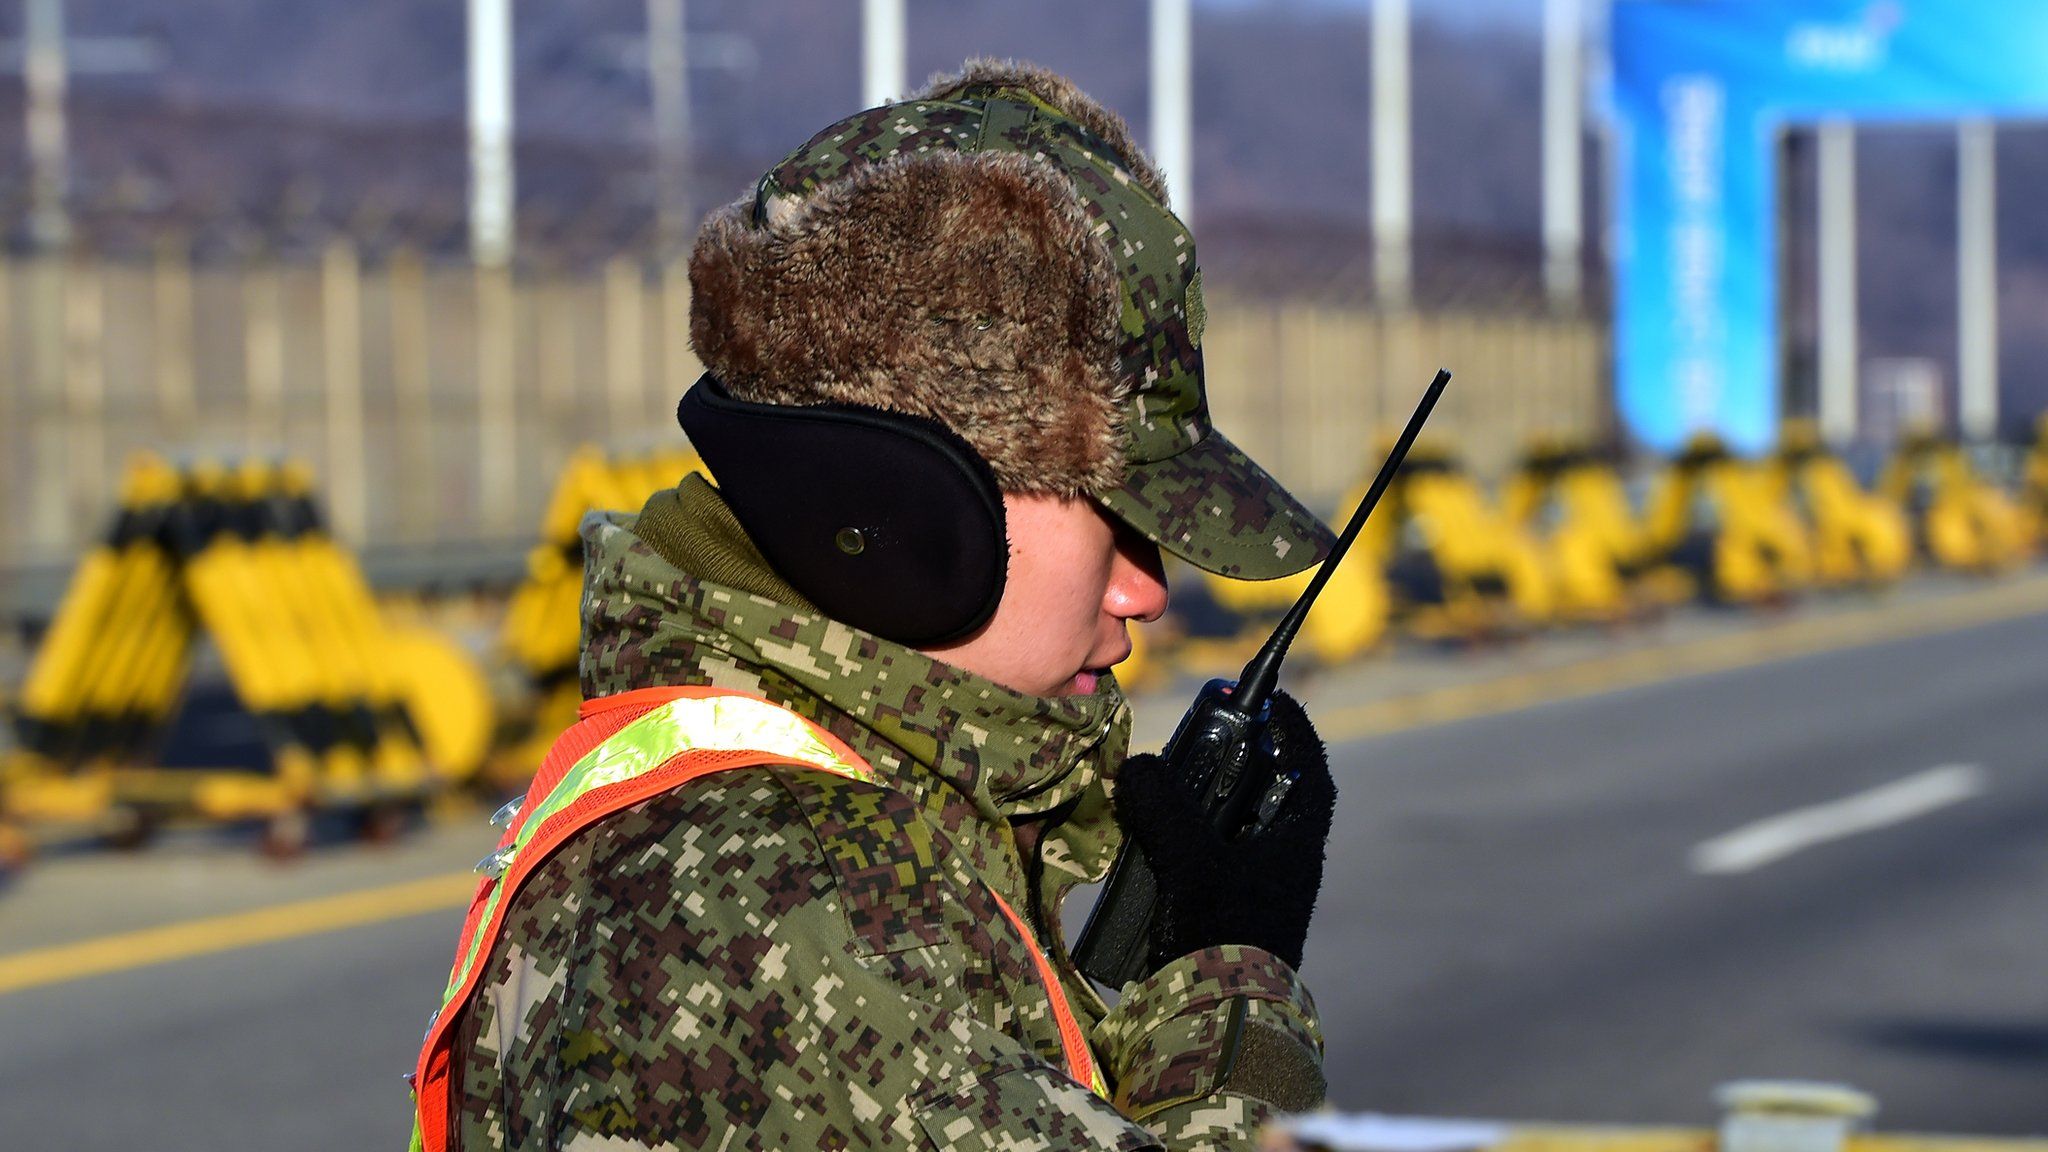 A South Korean soldier talks over a radio on the road leading to North Korea's Kaesong joint industrial complex at a military checkpoint in the border city of Paju near the Demilitarized zone dividing the two Koreas on January 8, 2016